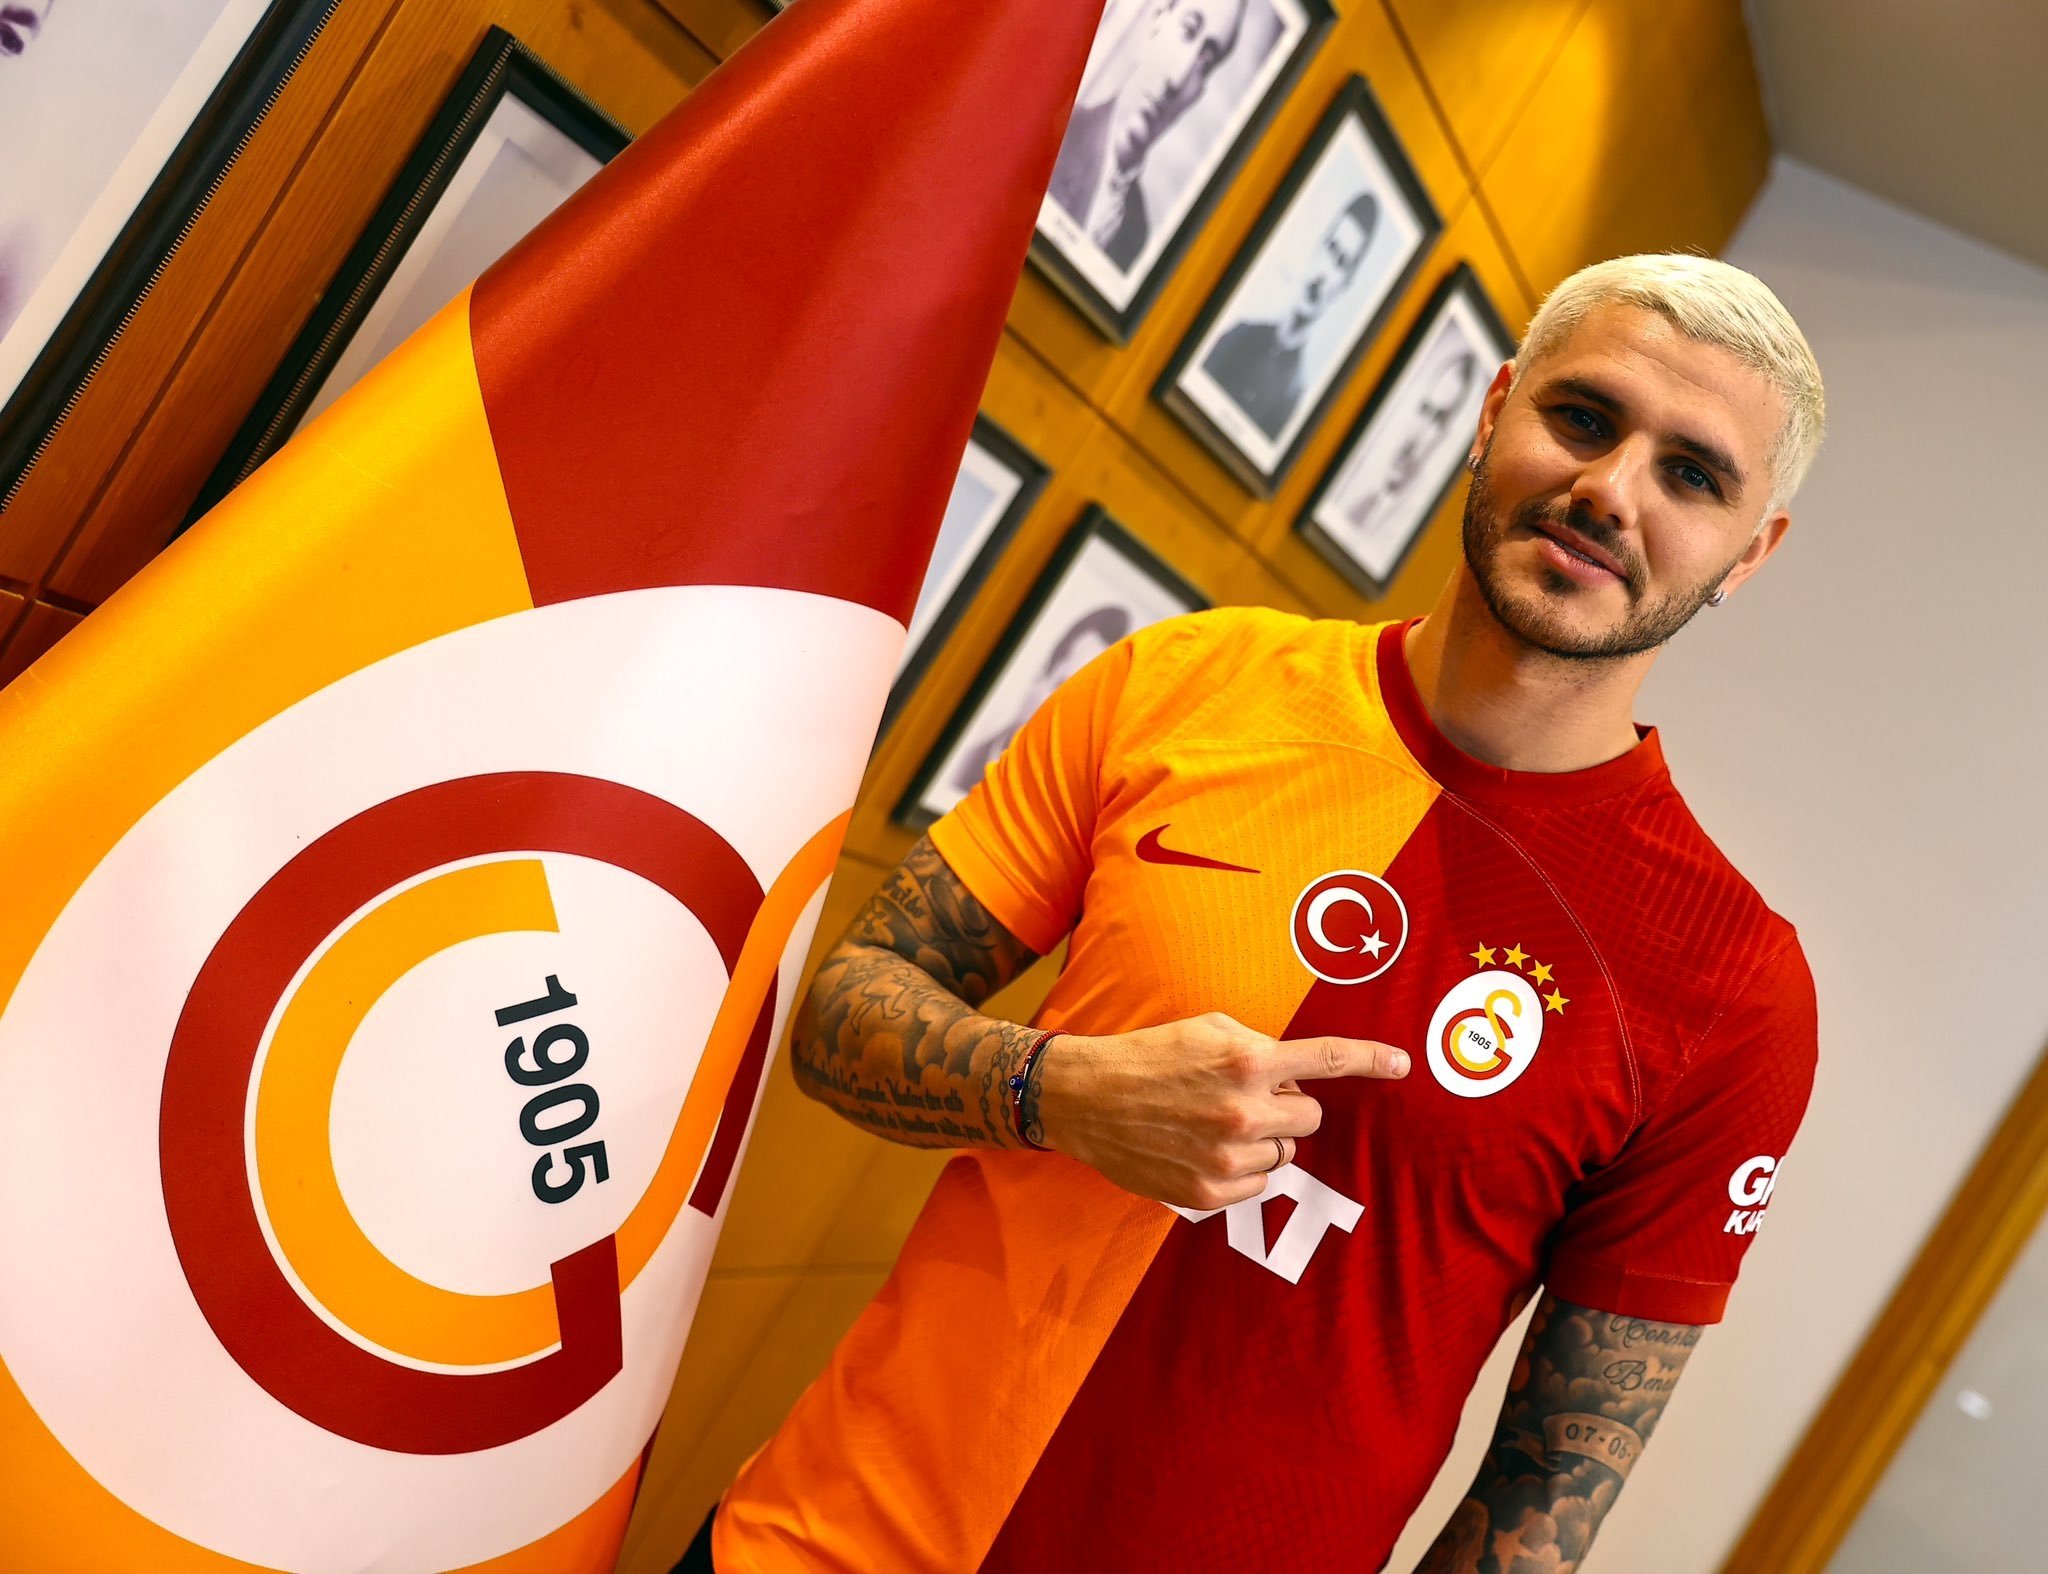 Turkish champions Galatasaray unveil Icardi after $11M PSG deal